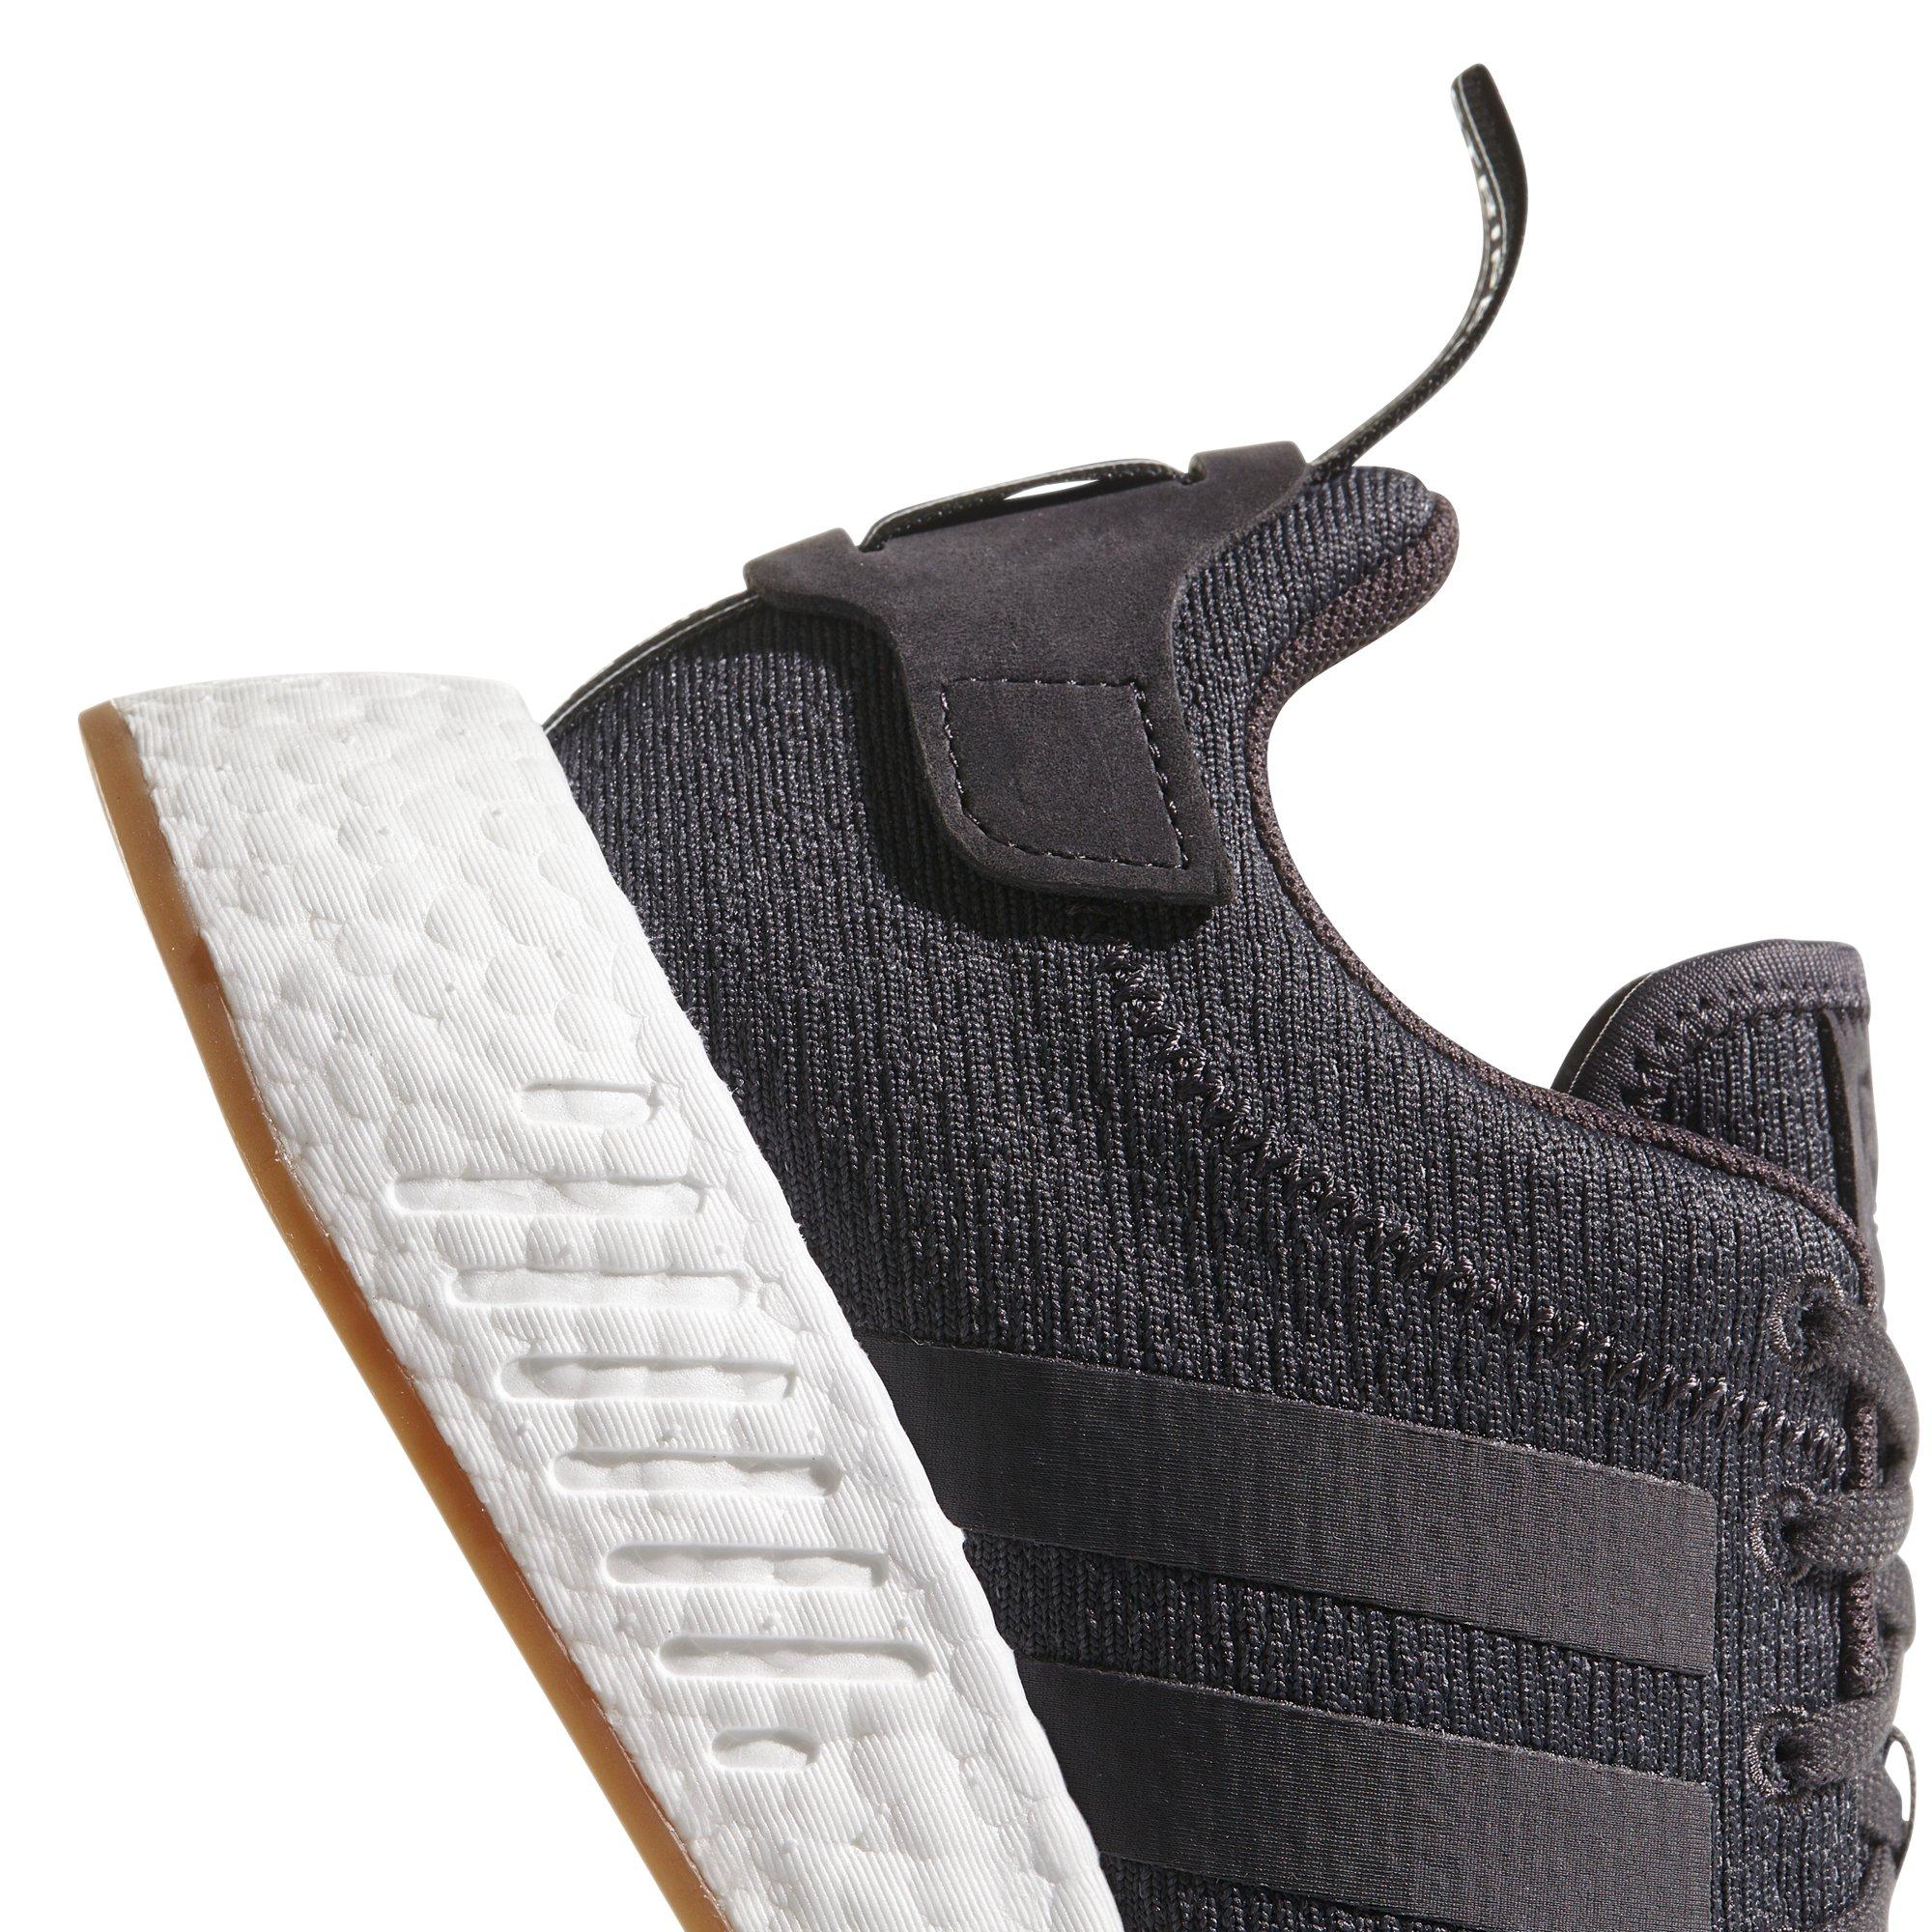 men's adidas nmd r2 casual shoes